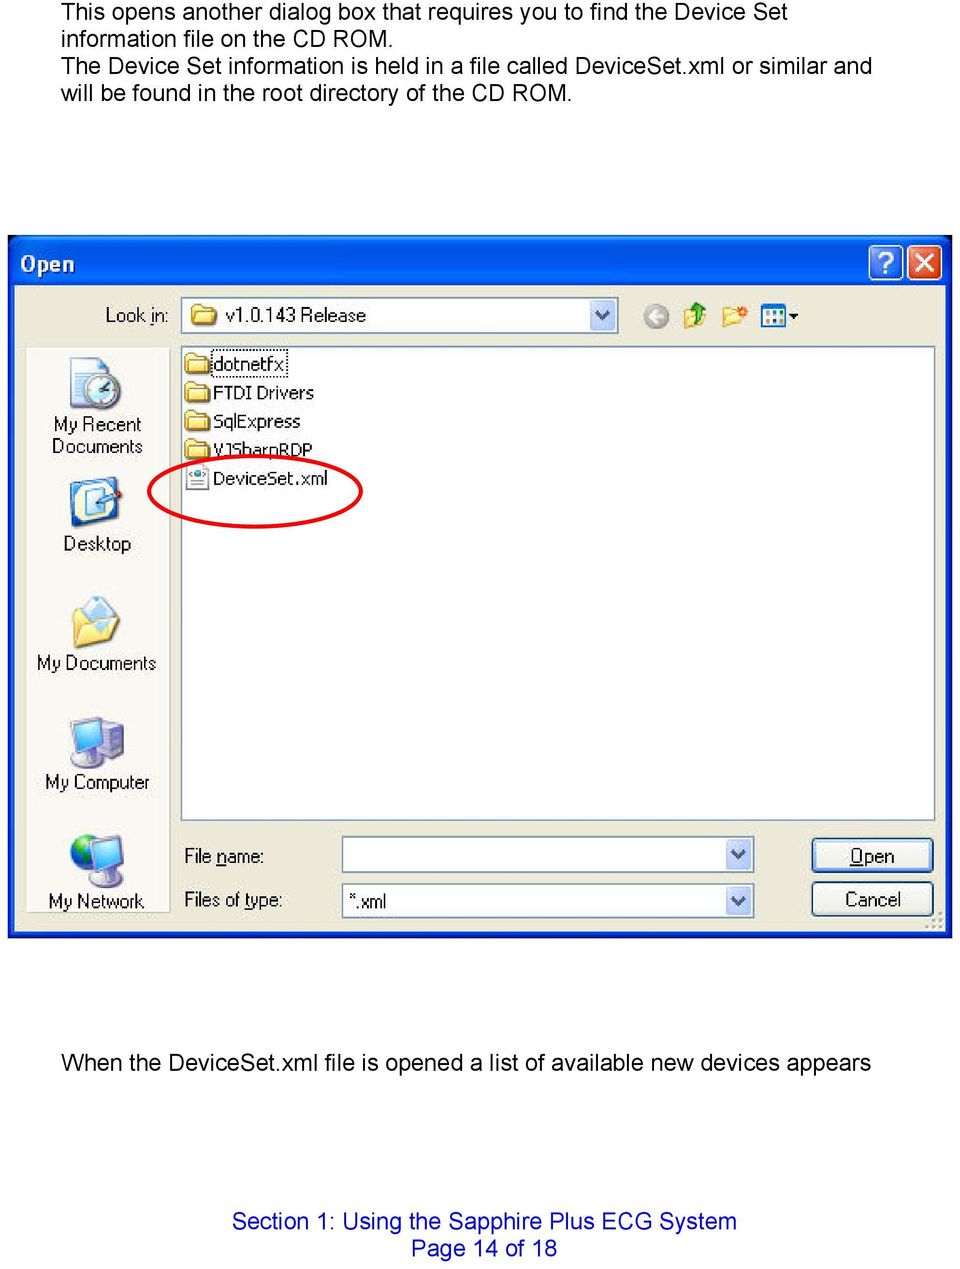 The Device Set information is held in a file called DeviceSet.